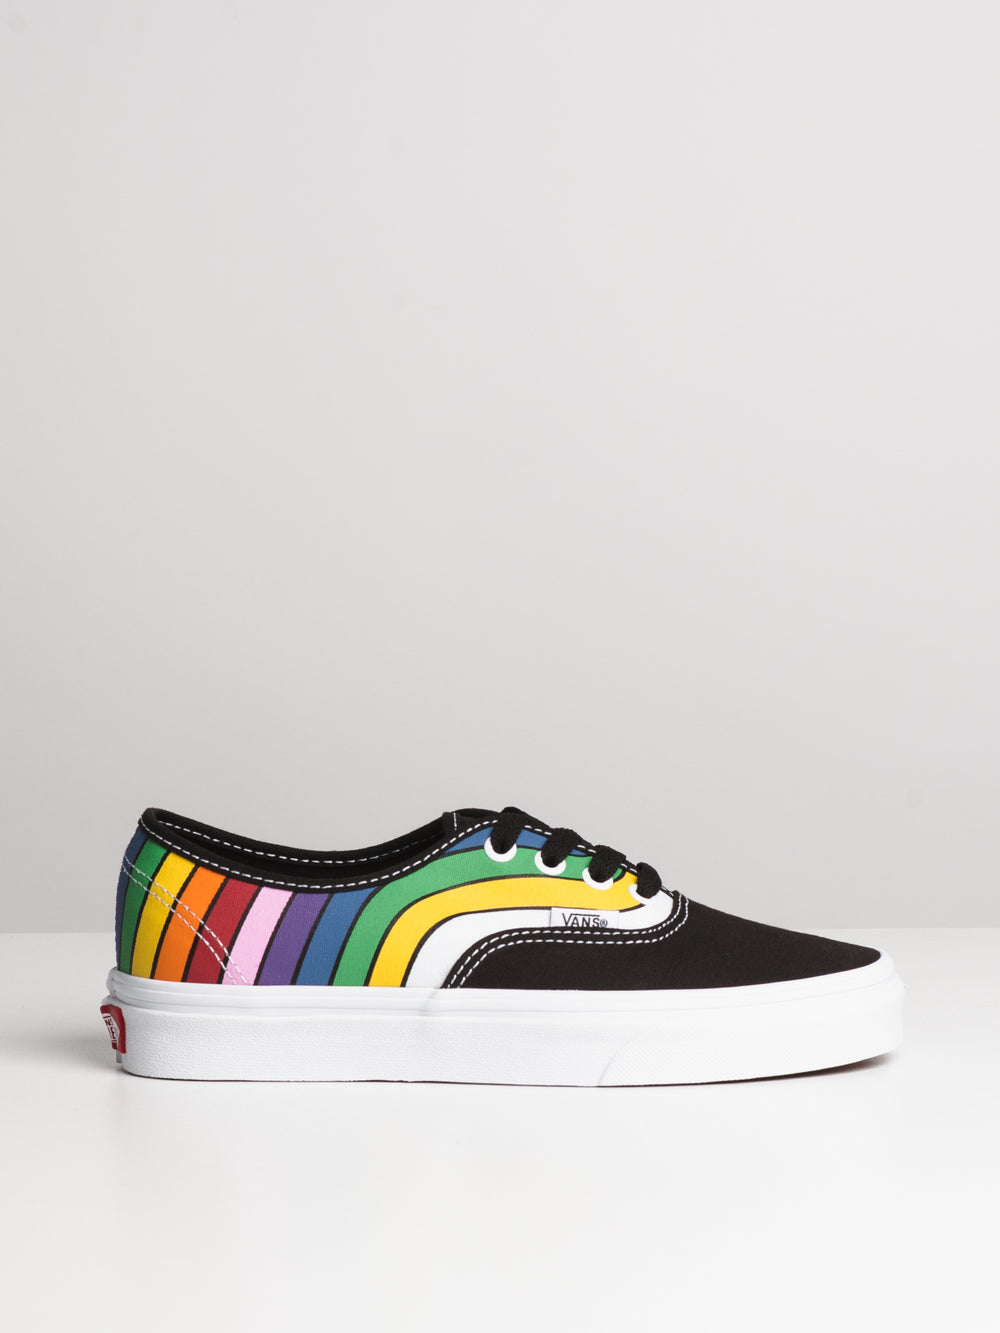 WOMENS AUTHENTIC - REFRACT BLACK - CLEARANCE